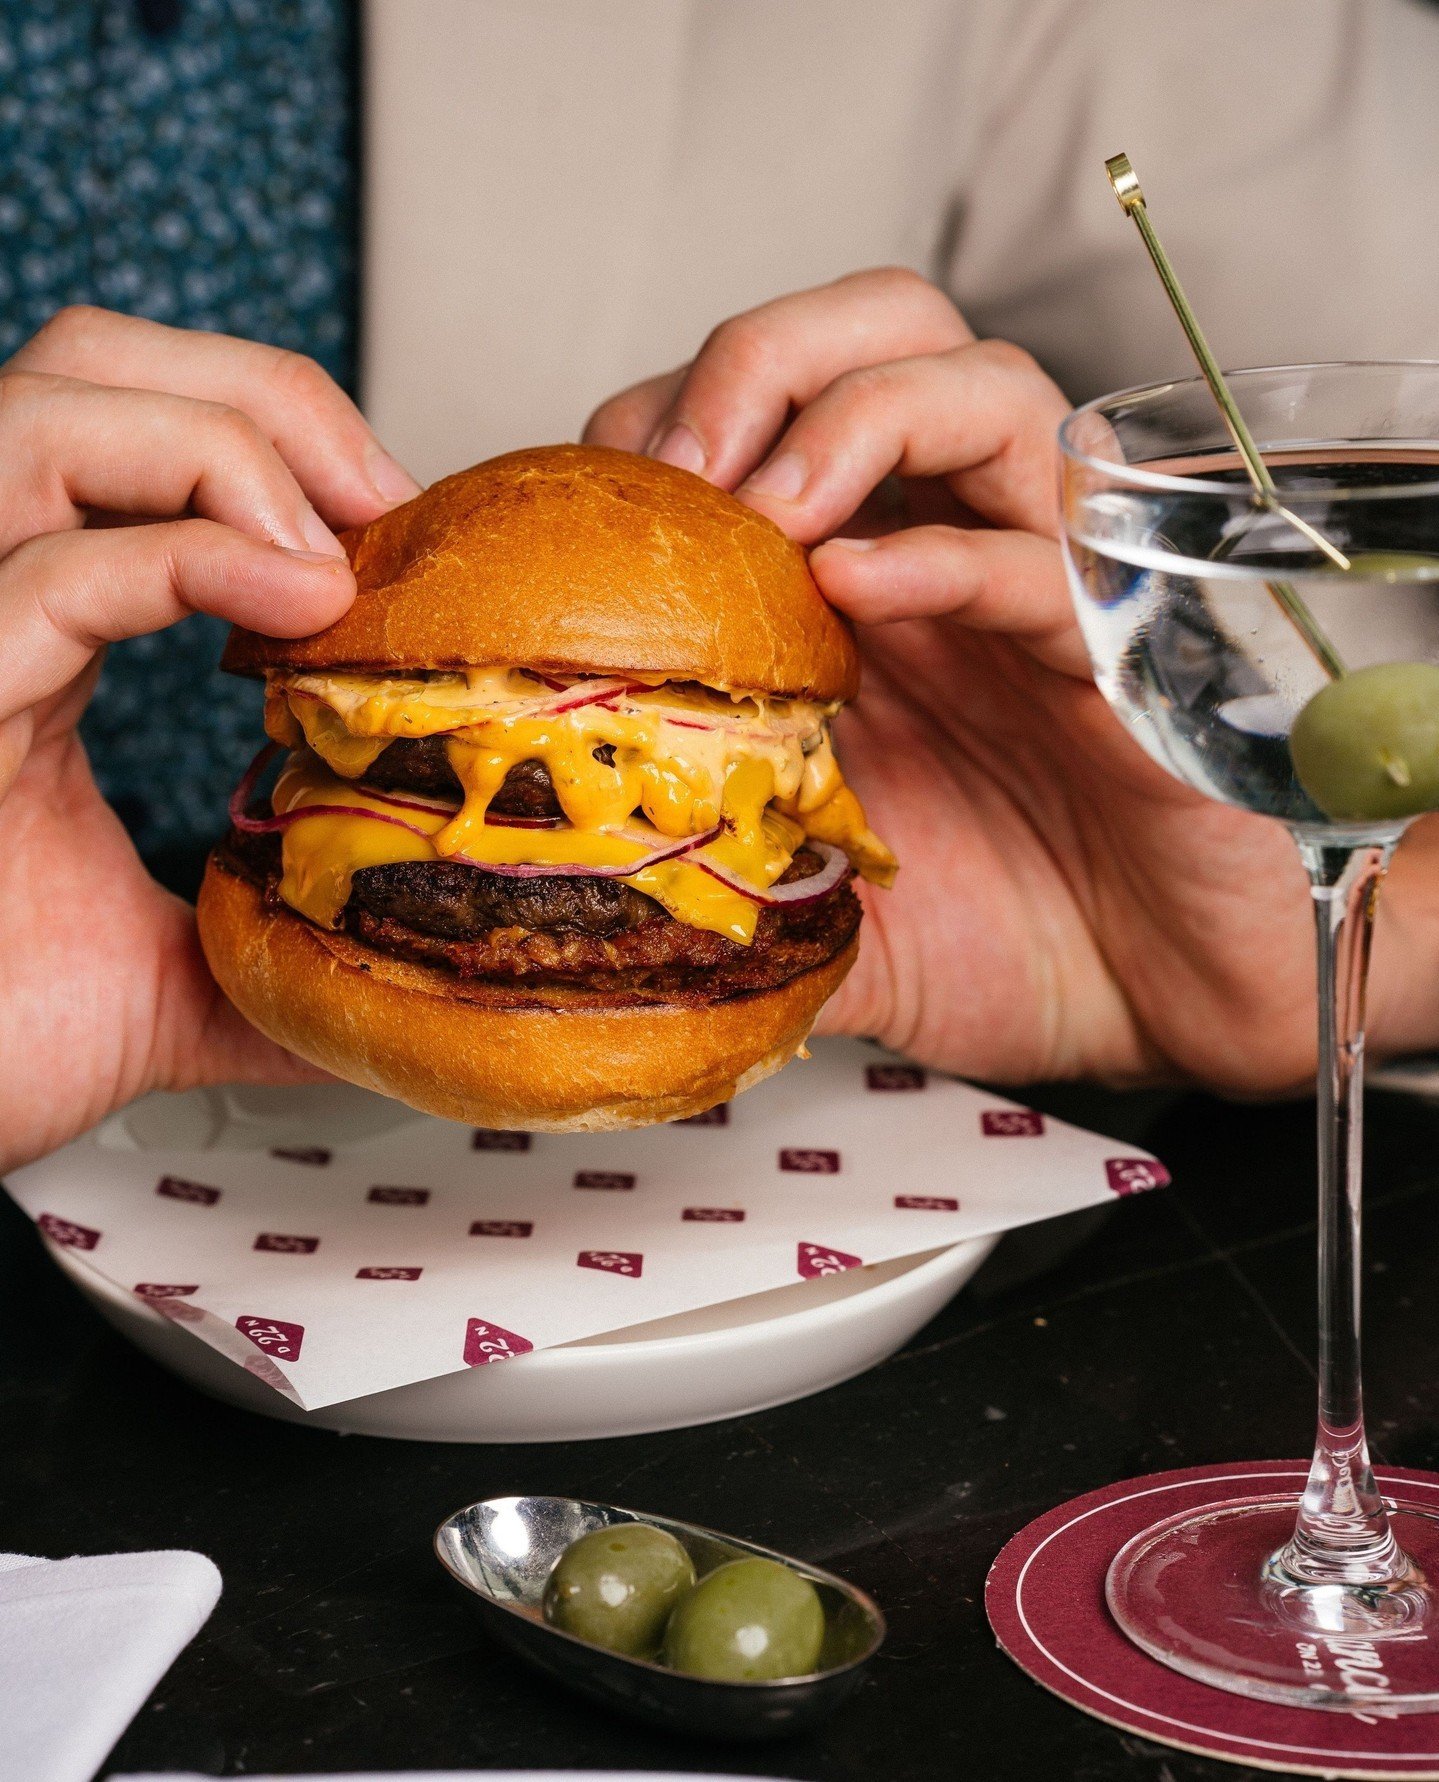 A sight for sore eyes &mdash; $20 wagyu brisket burgers and $15 martinis, every Wednesday. Go on, Dean insists.